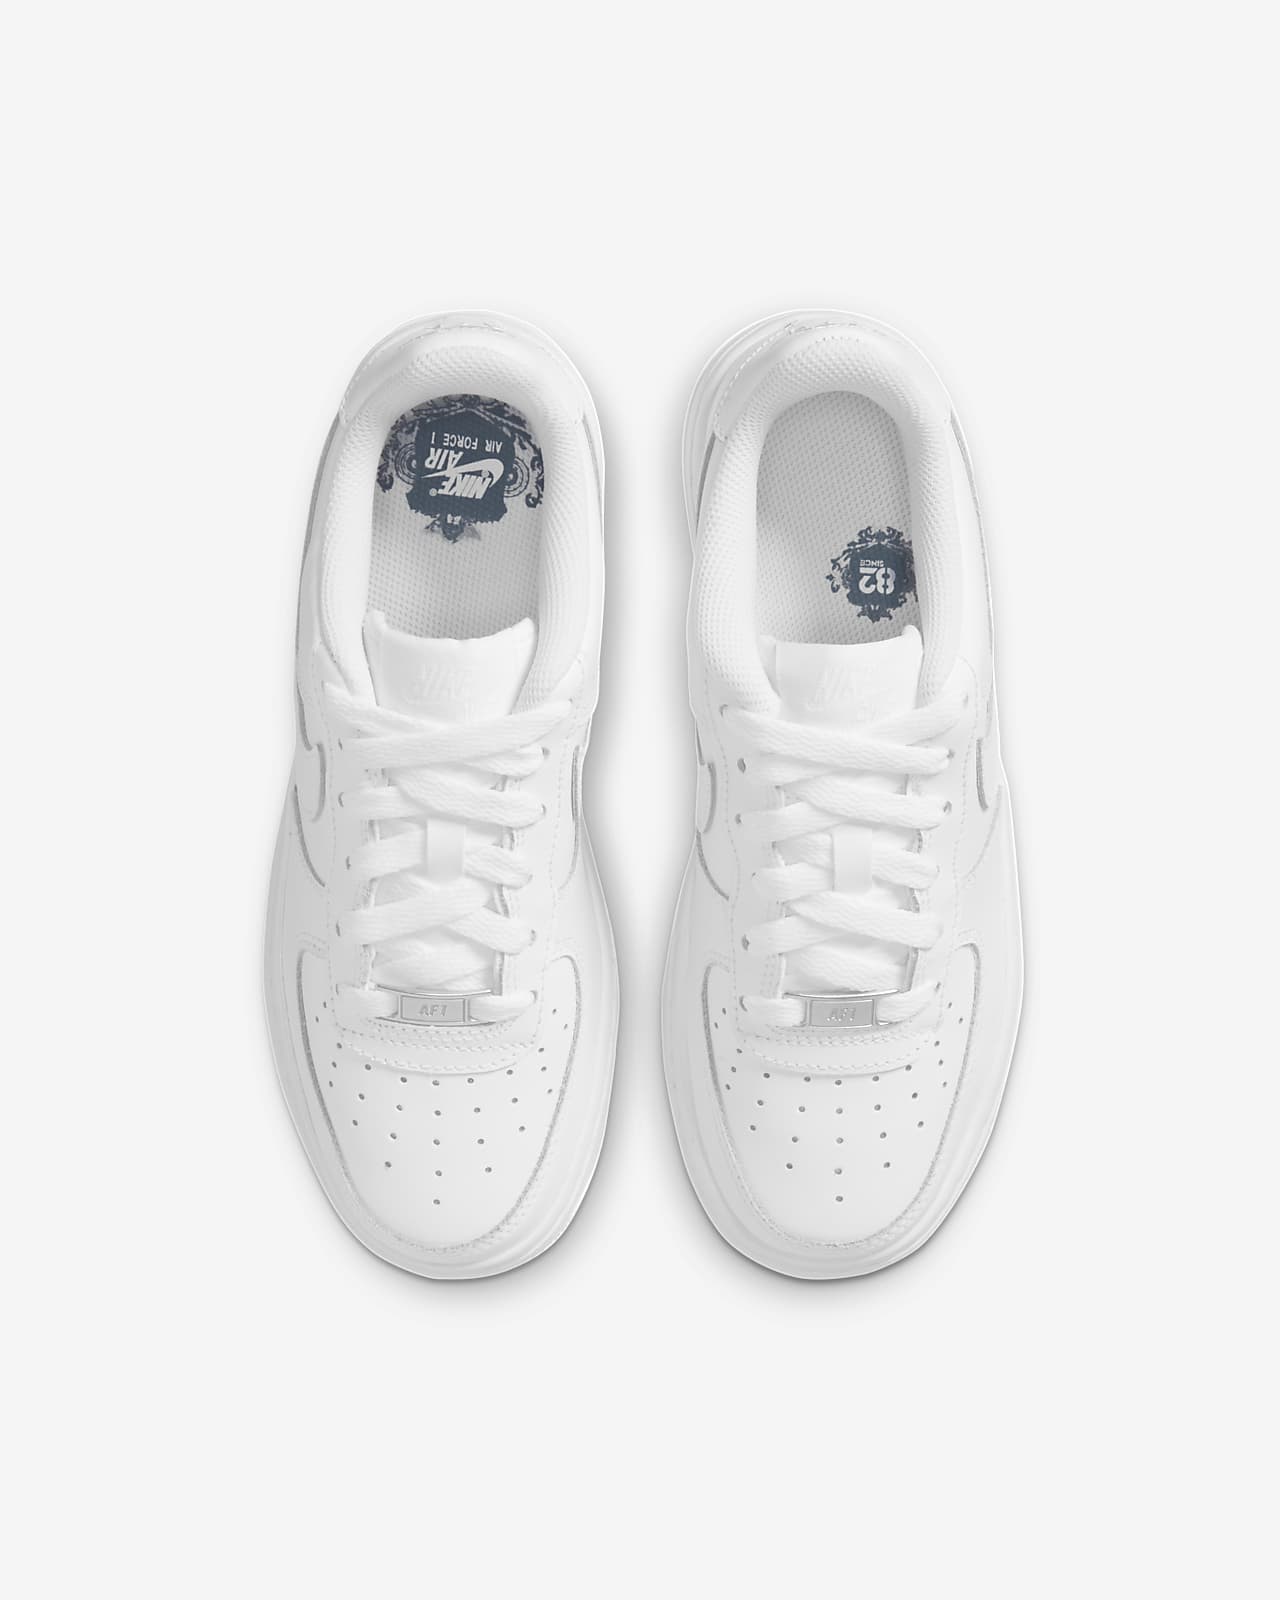 nike air force 1 junior size 5 white